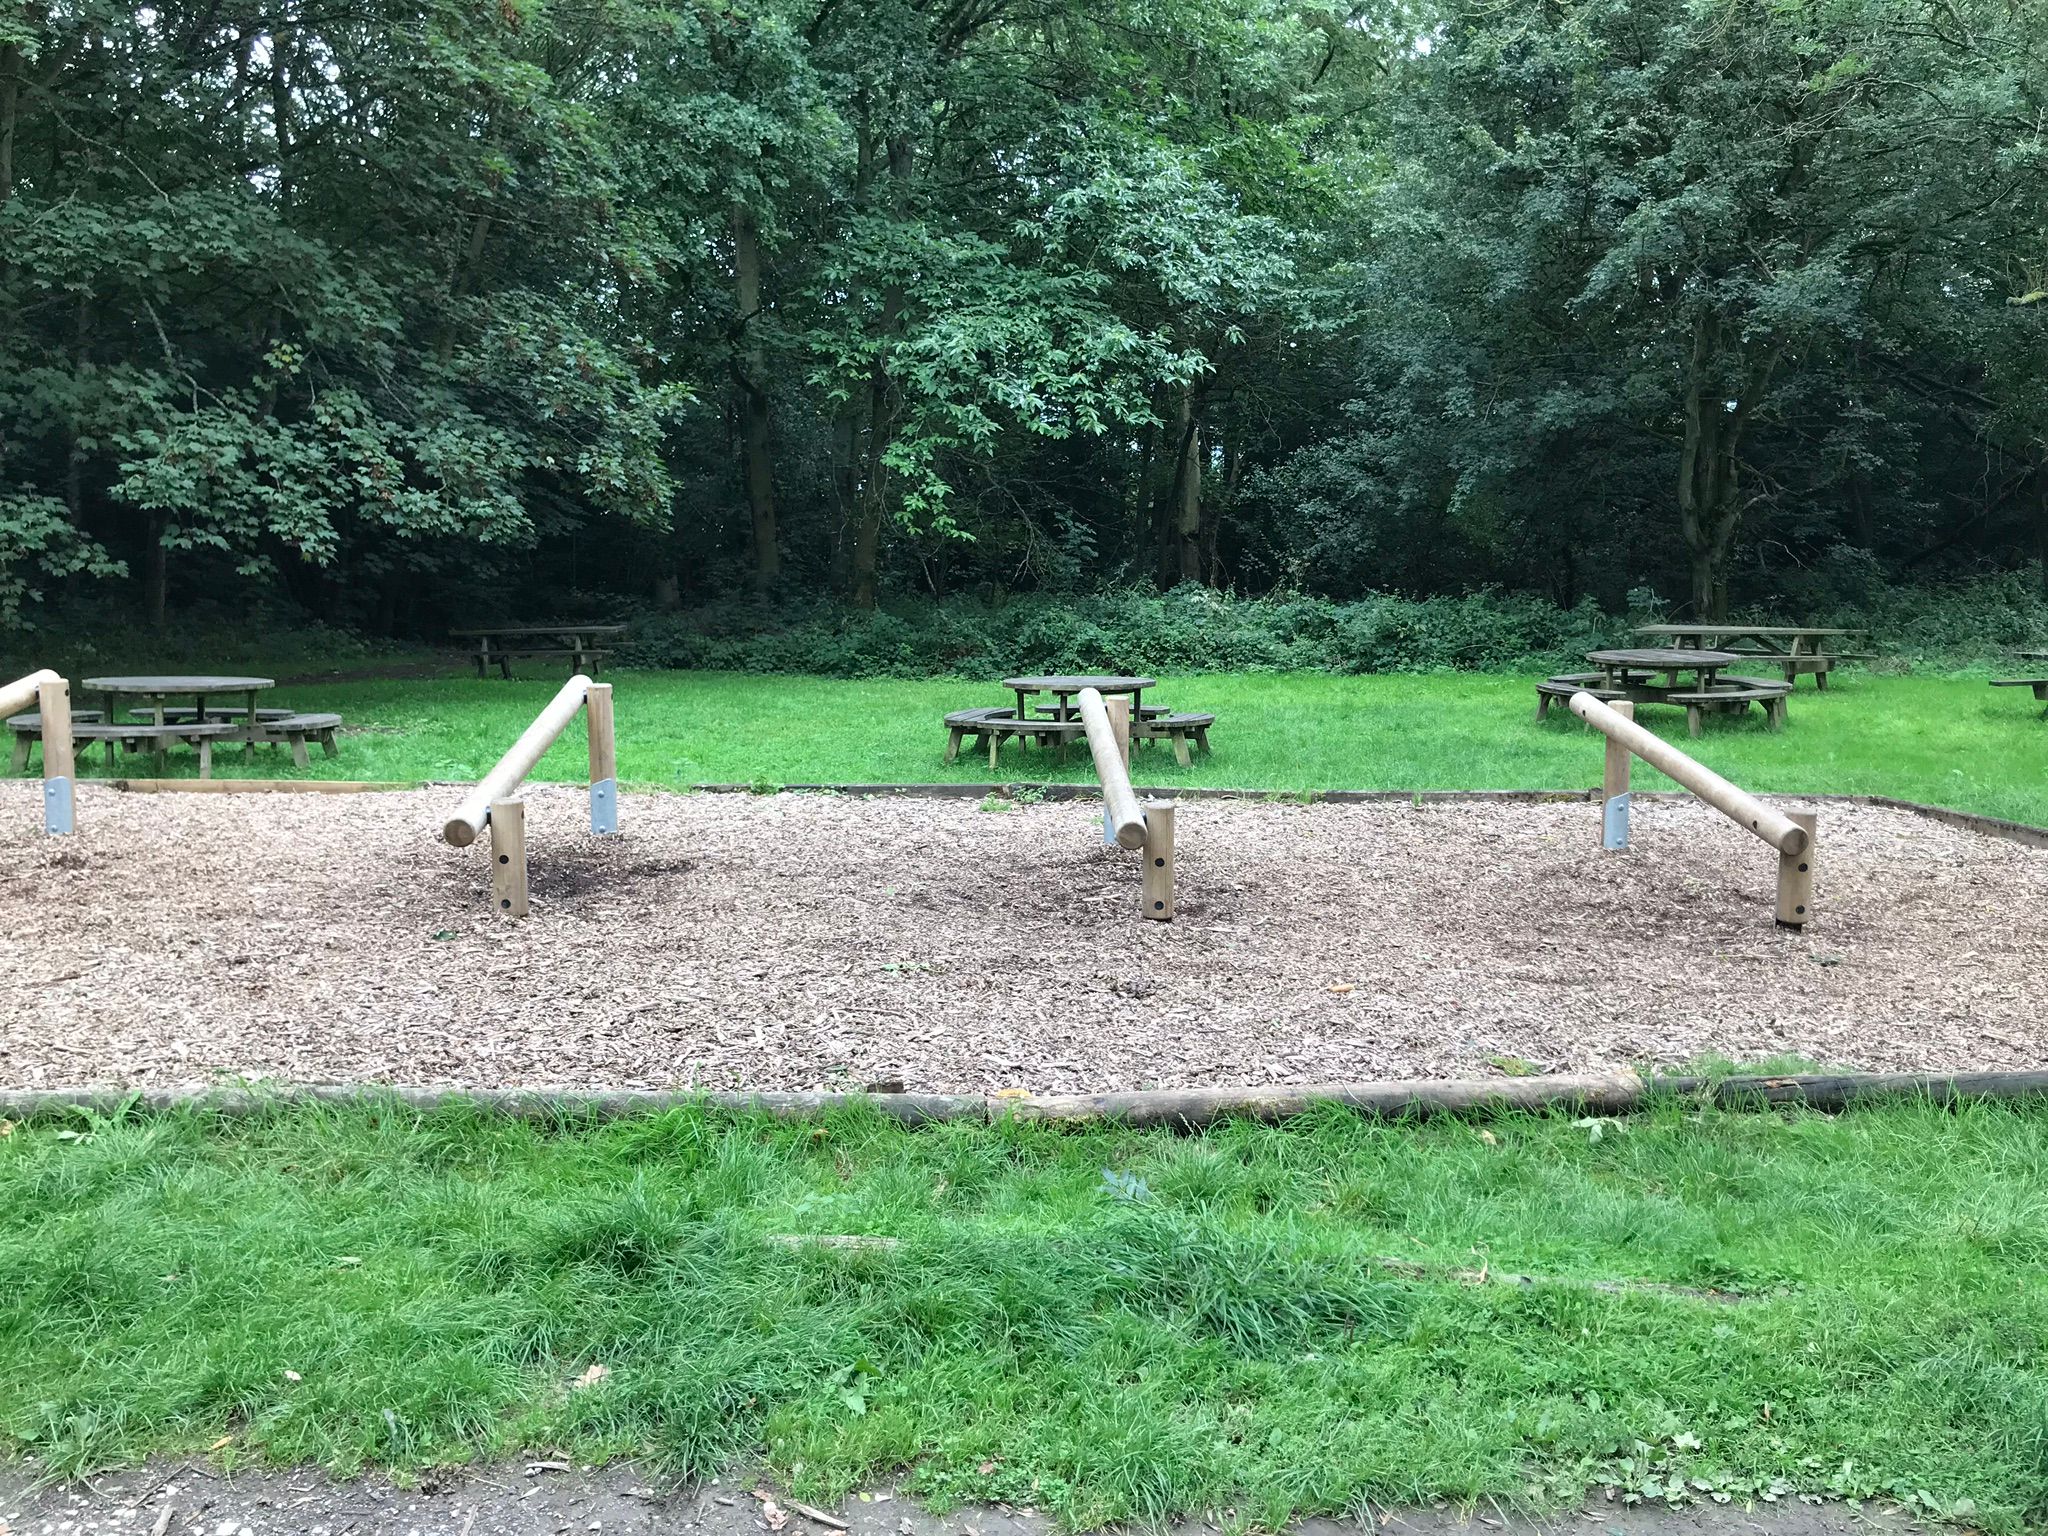 Some of the trim trail equipment at Trosley Country Park